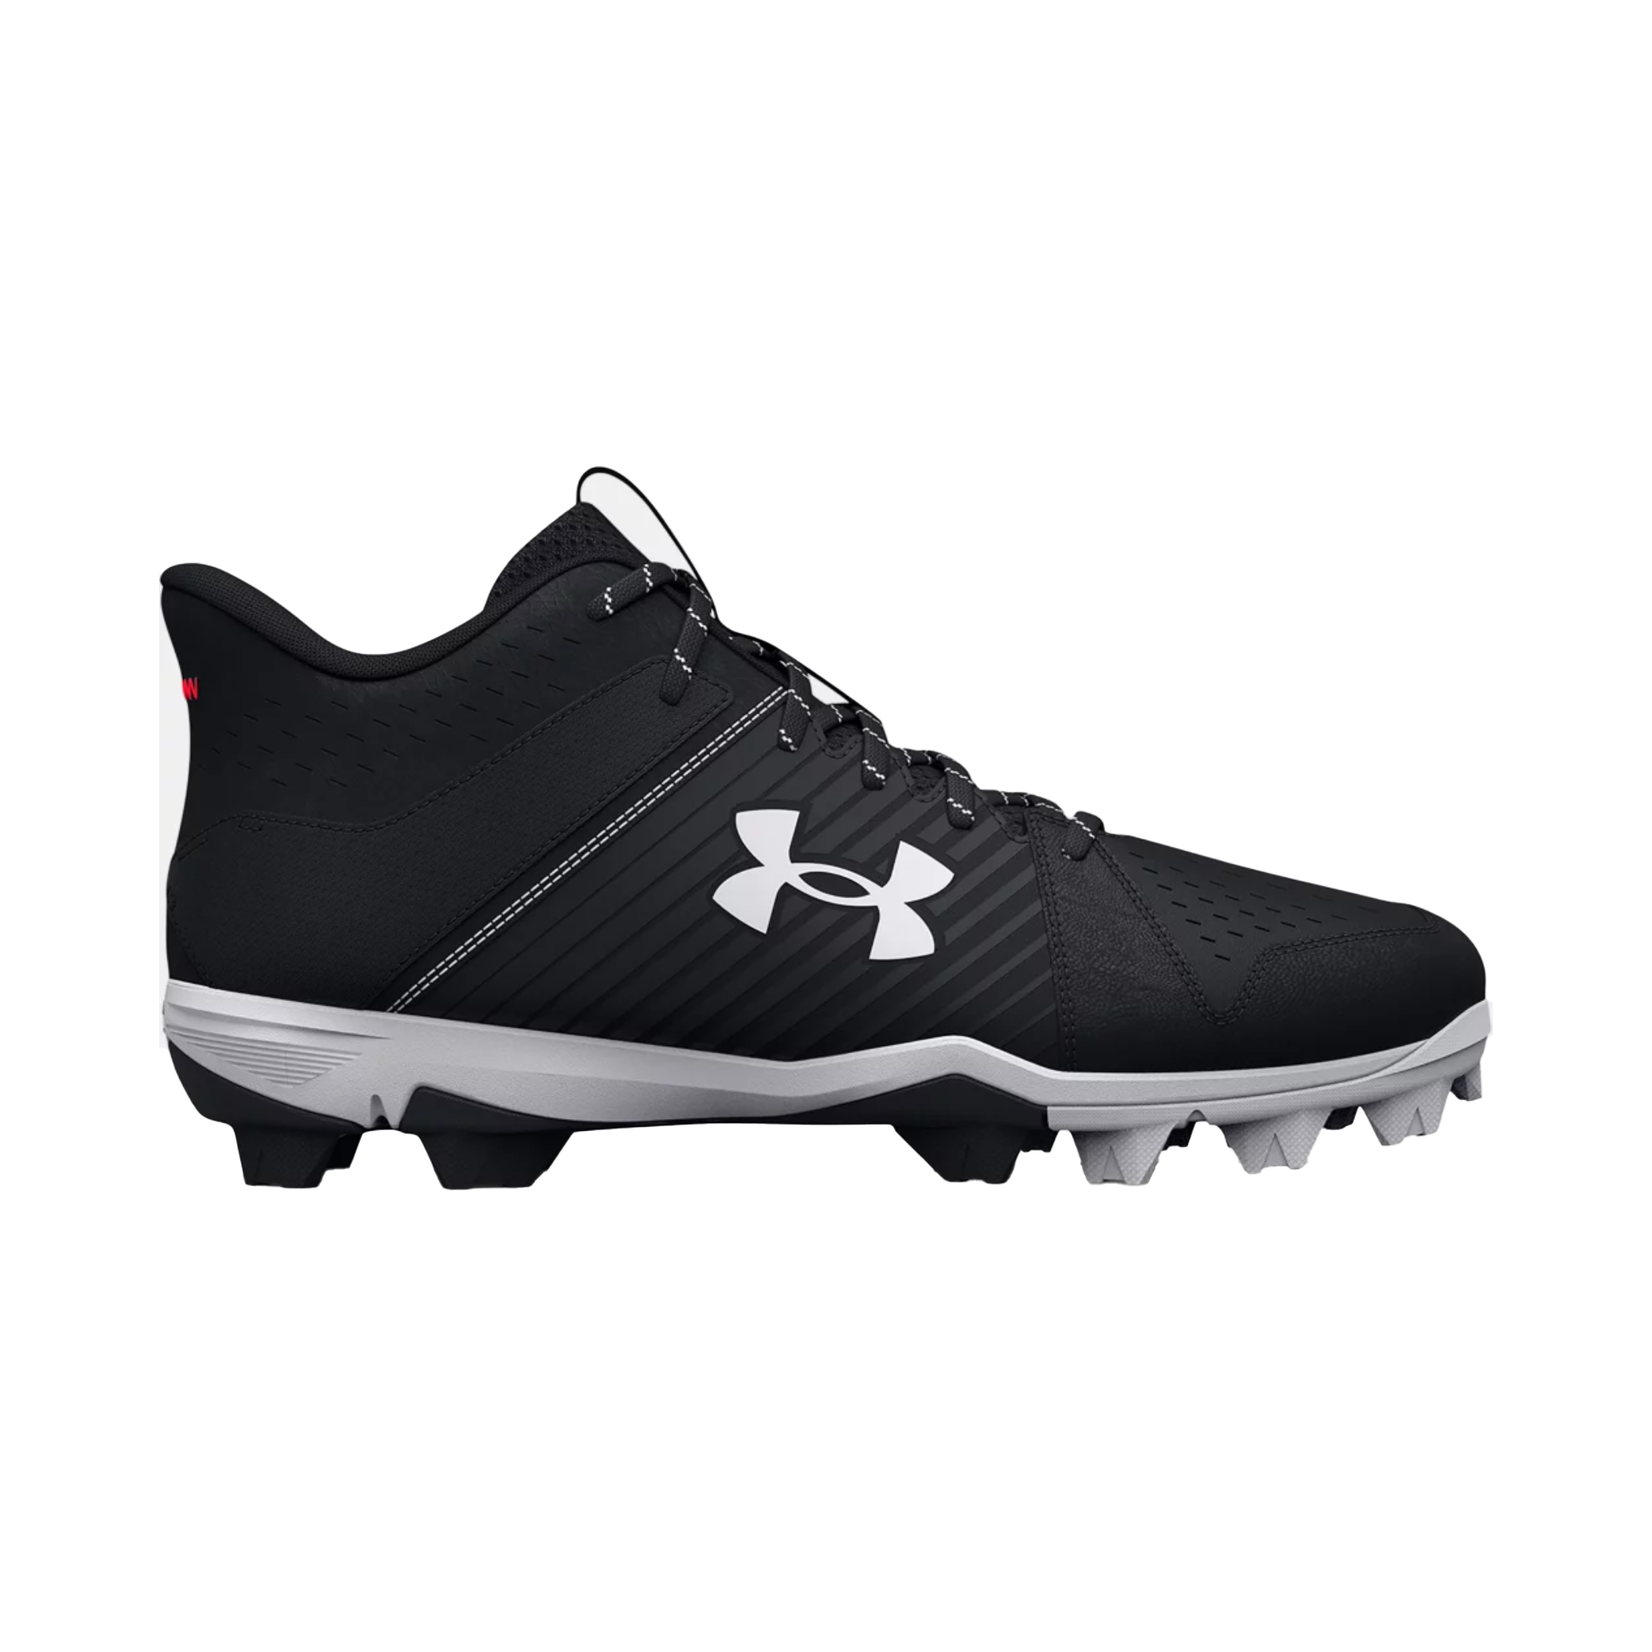 Under Armour S22 Leadoff Mid RM Cleats